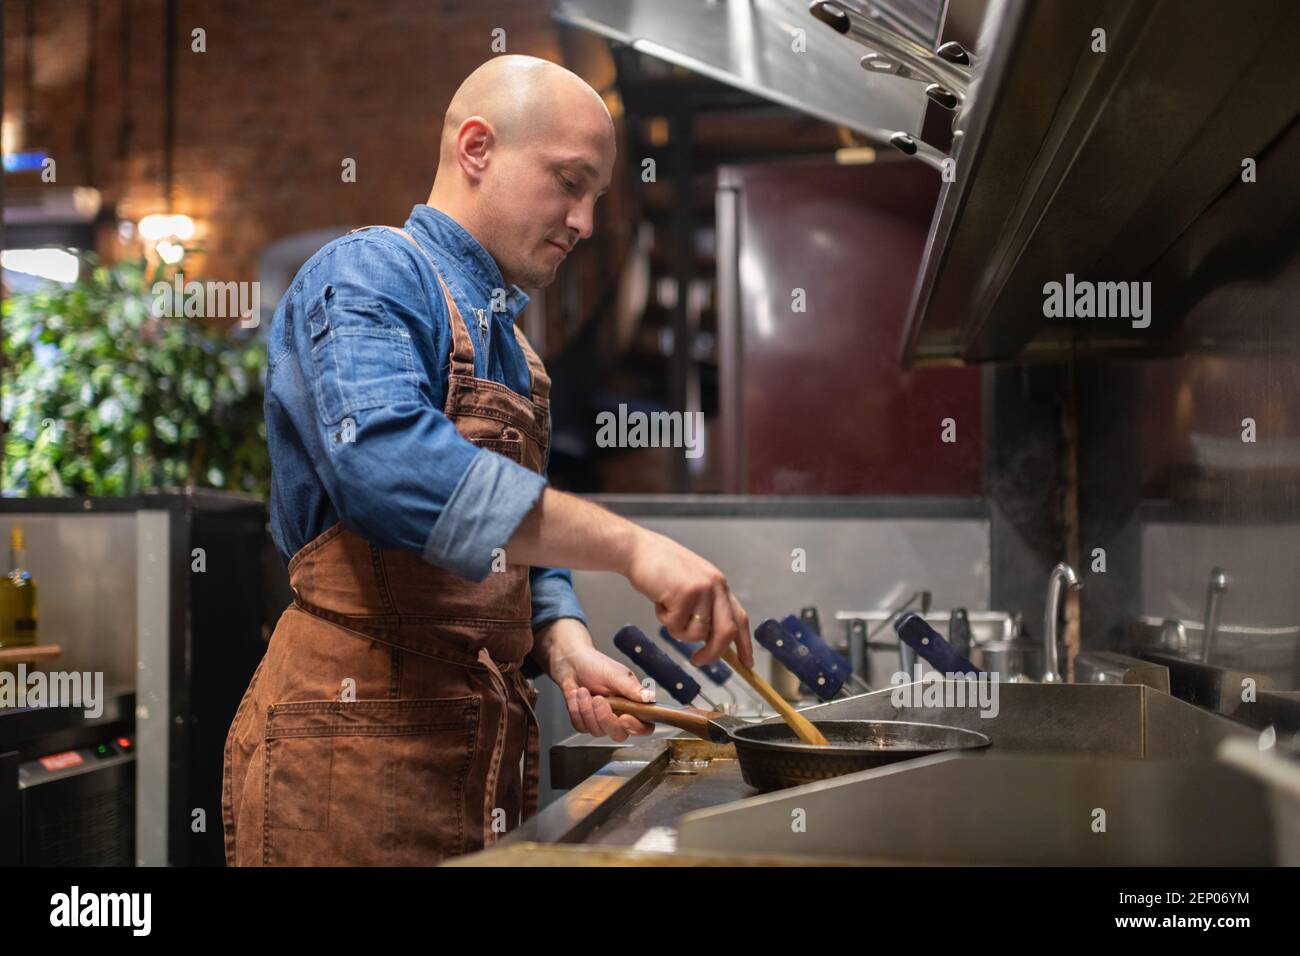 https://c8.alamy.com/comp/2EP06YM/bald-man-with-spoon-frying-dish-on-hot-pan-on-stove-during-work-in-cafe-kitchen-2EP06YM.jpg